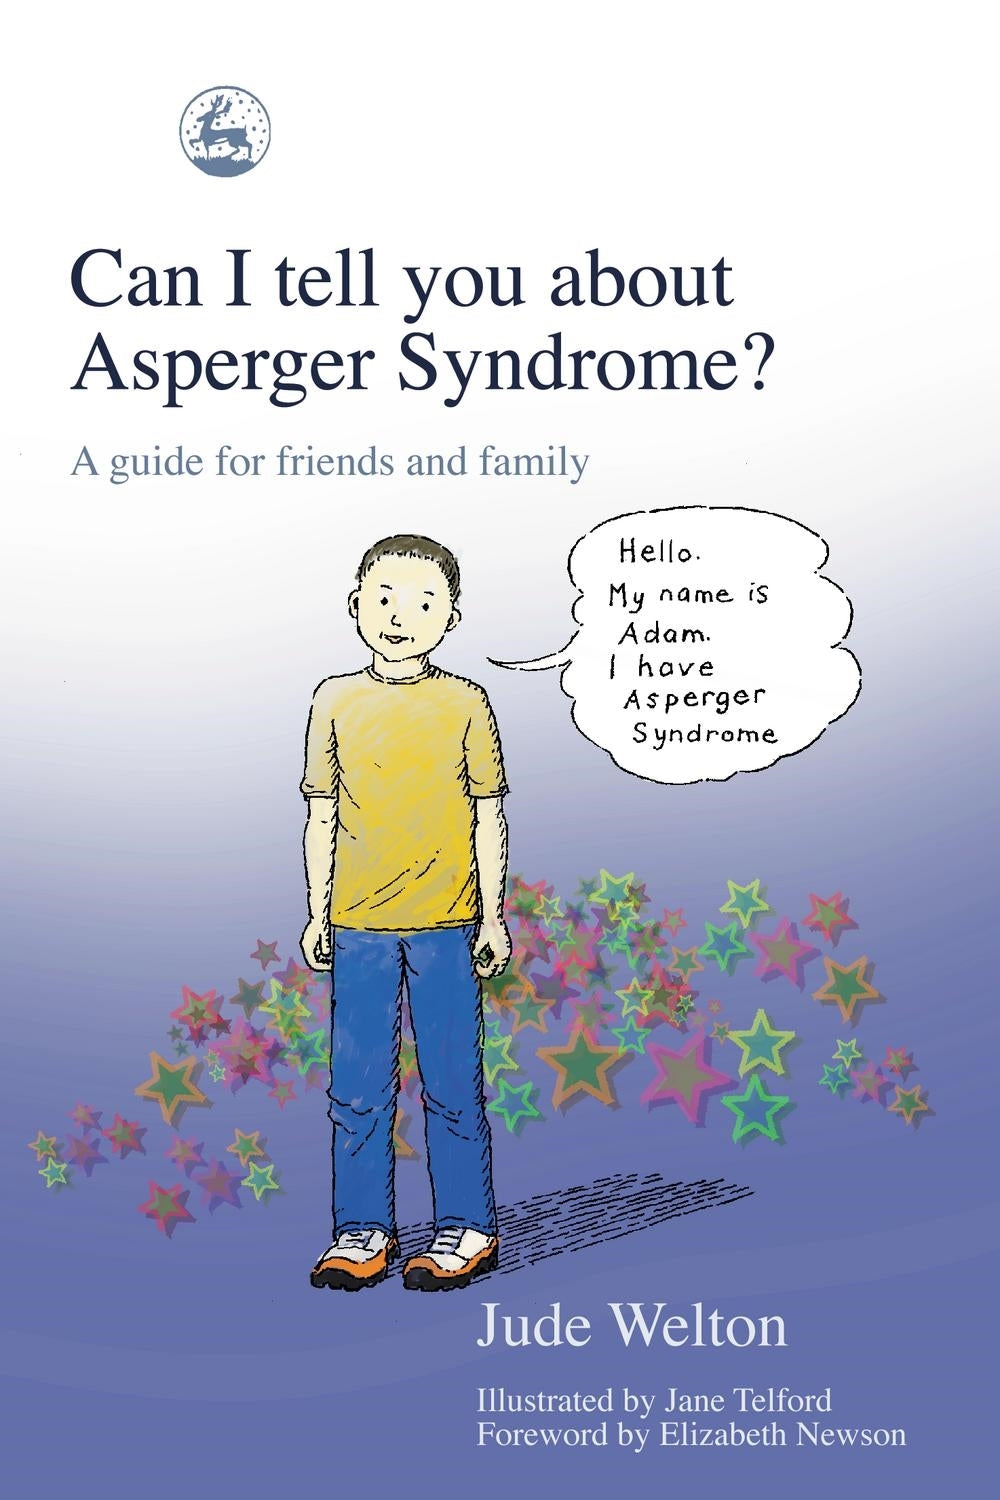 Can I tell you about Asperger Syndrome? by Jane Telford, Jude Welton, Elizabeth Newson